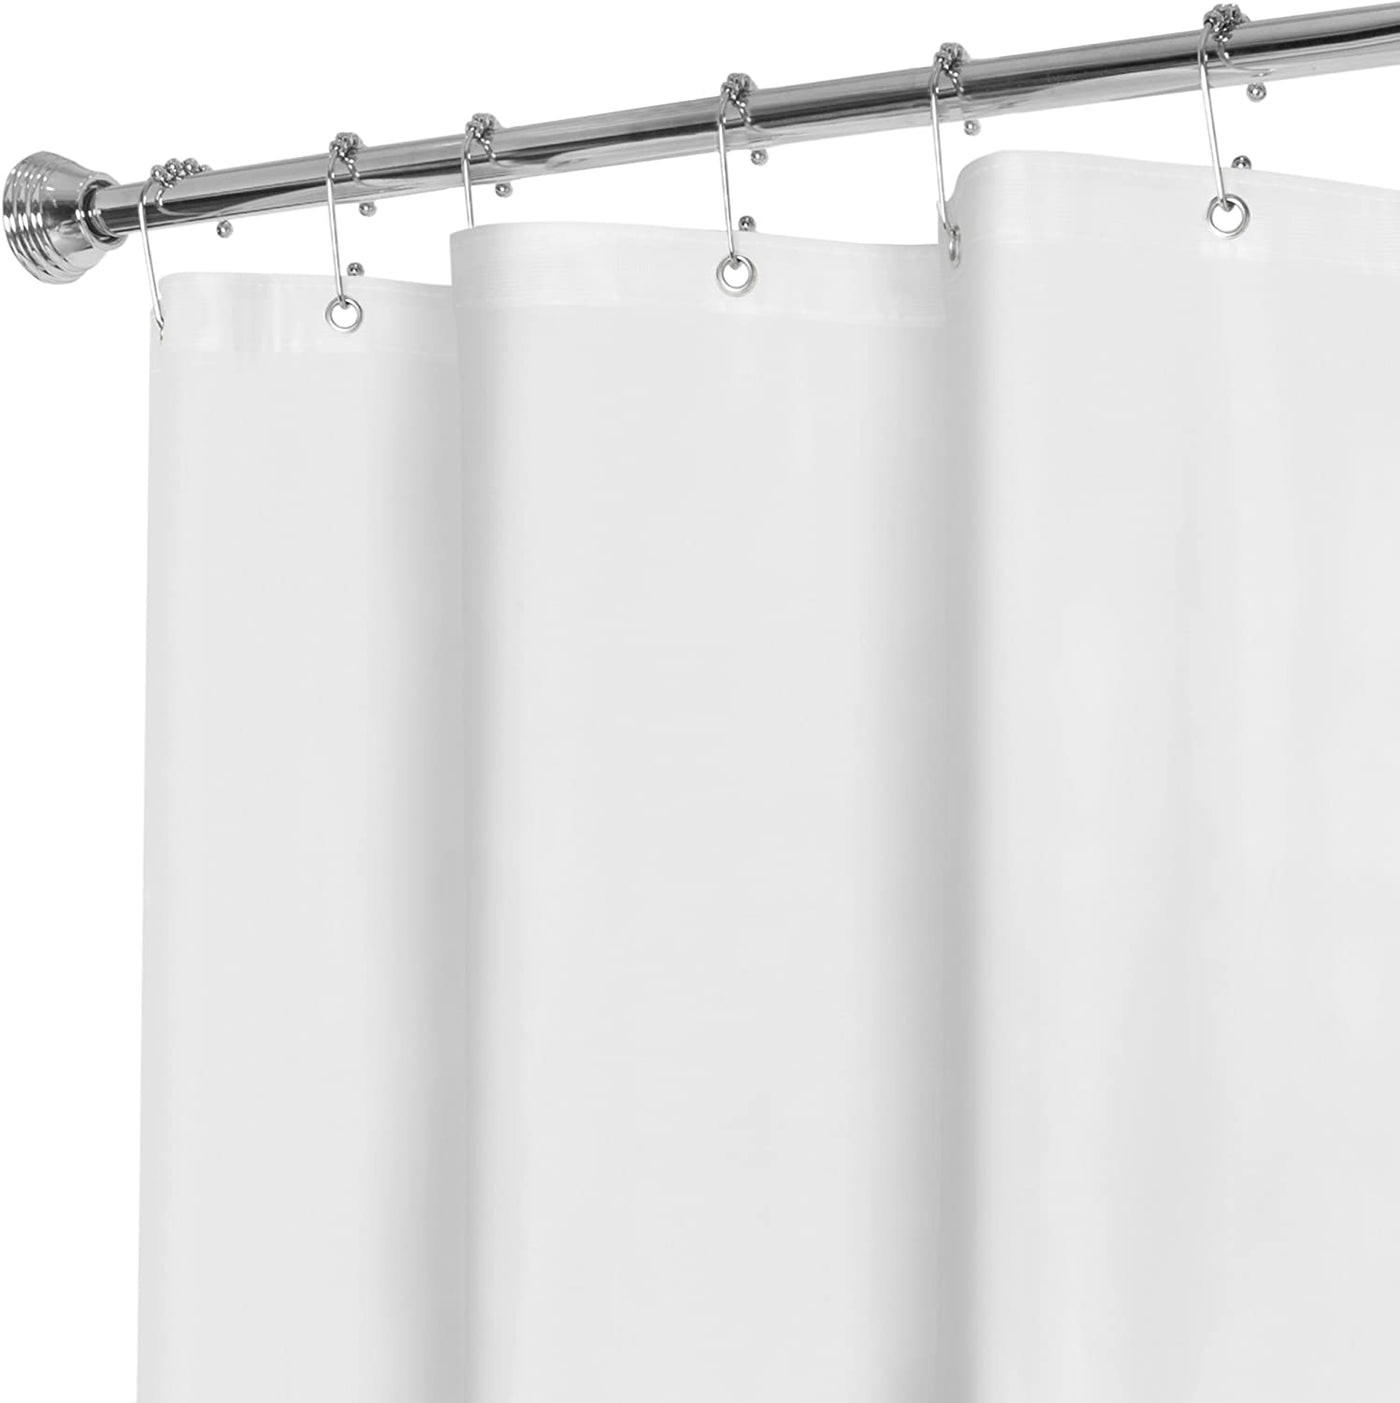 SHOWER CURTAINS & LINERS.